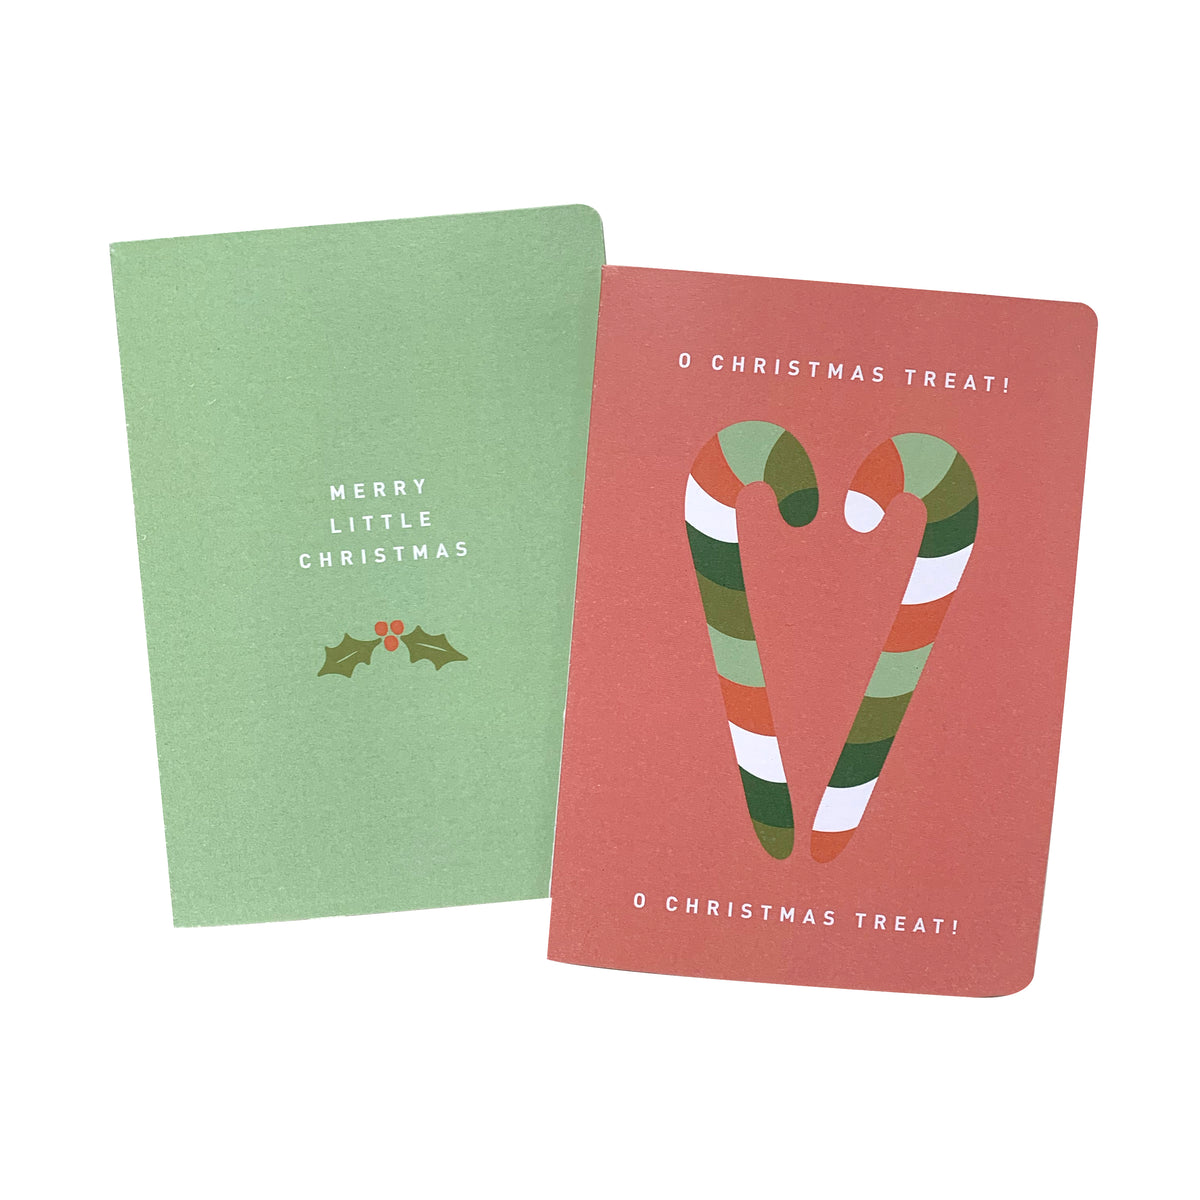 'Merry Little Christmas Treat' Greeting Card Set of 10